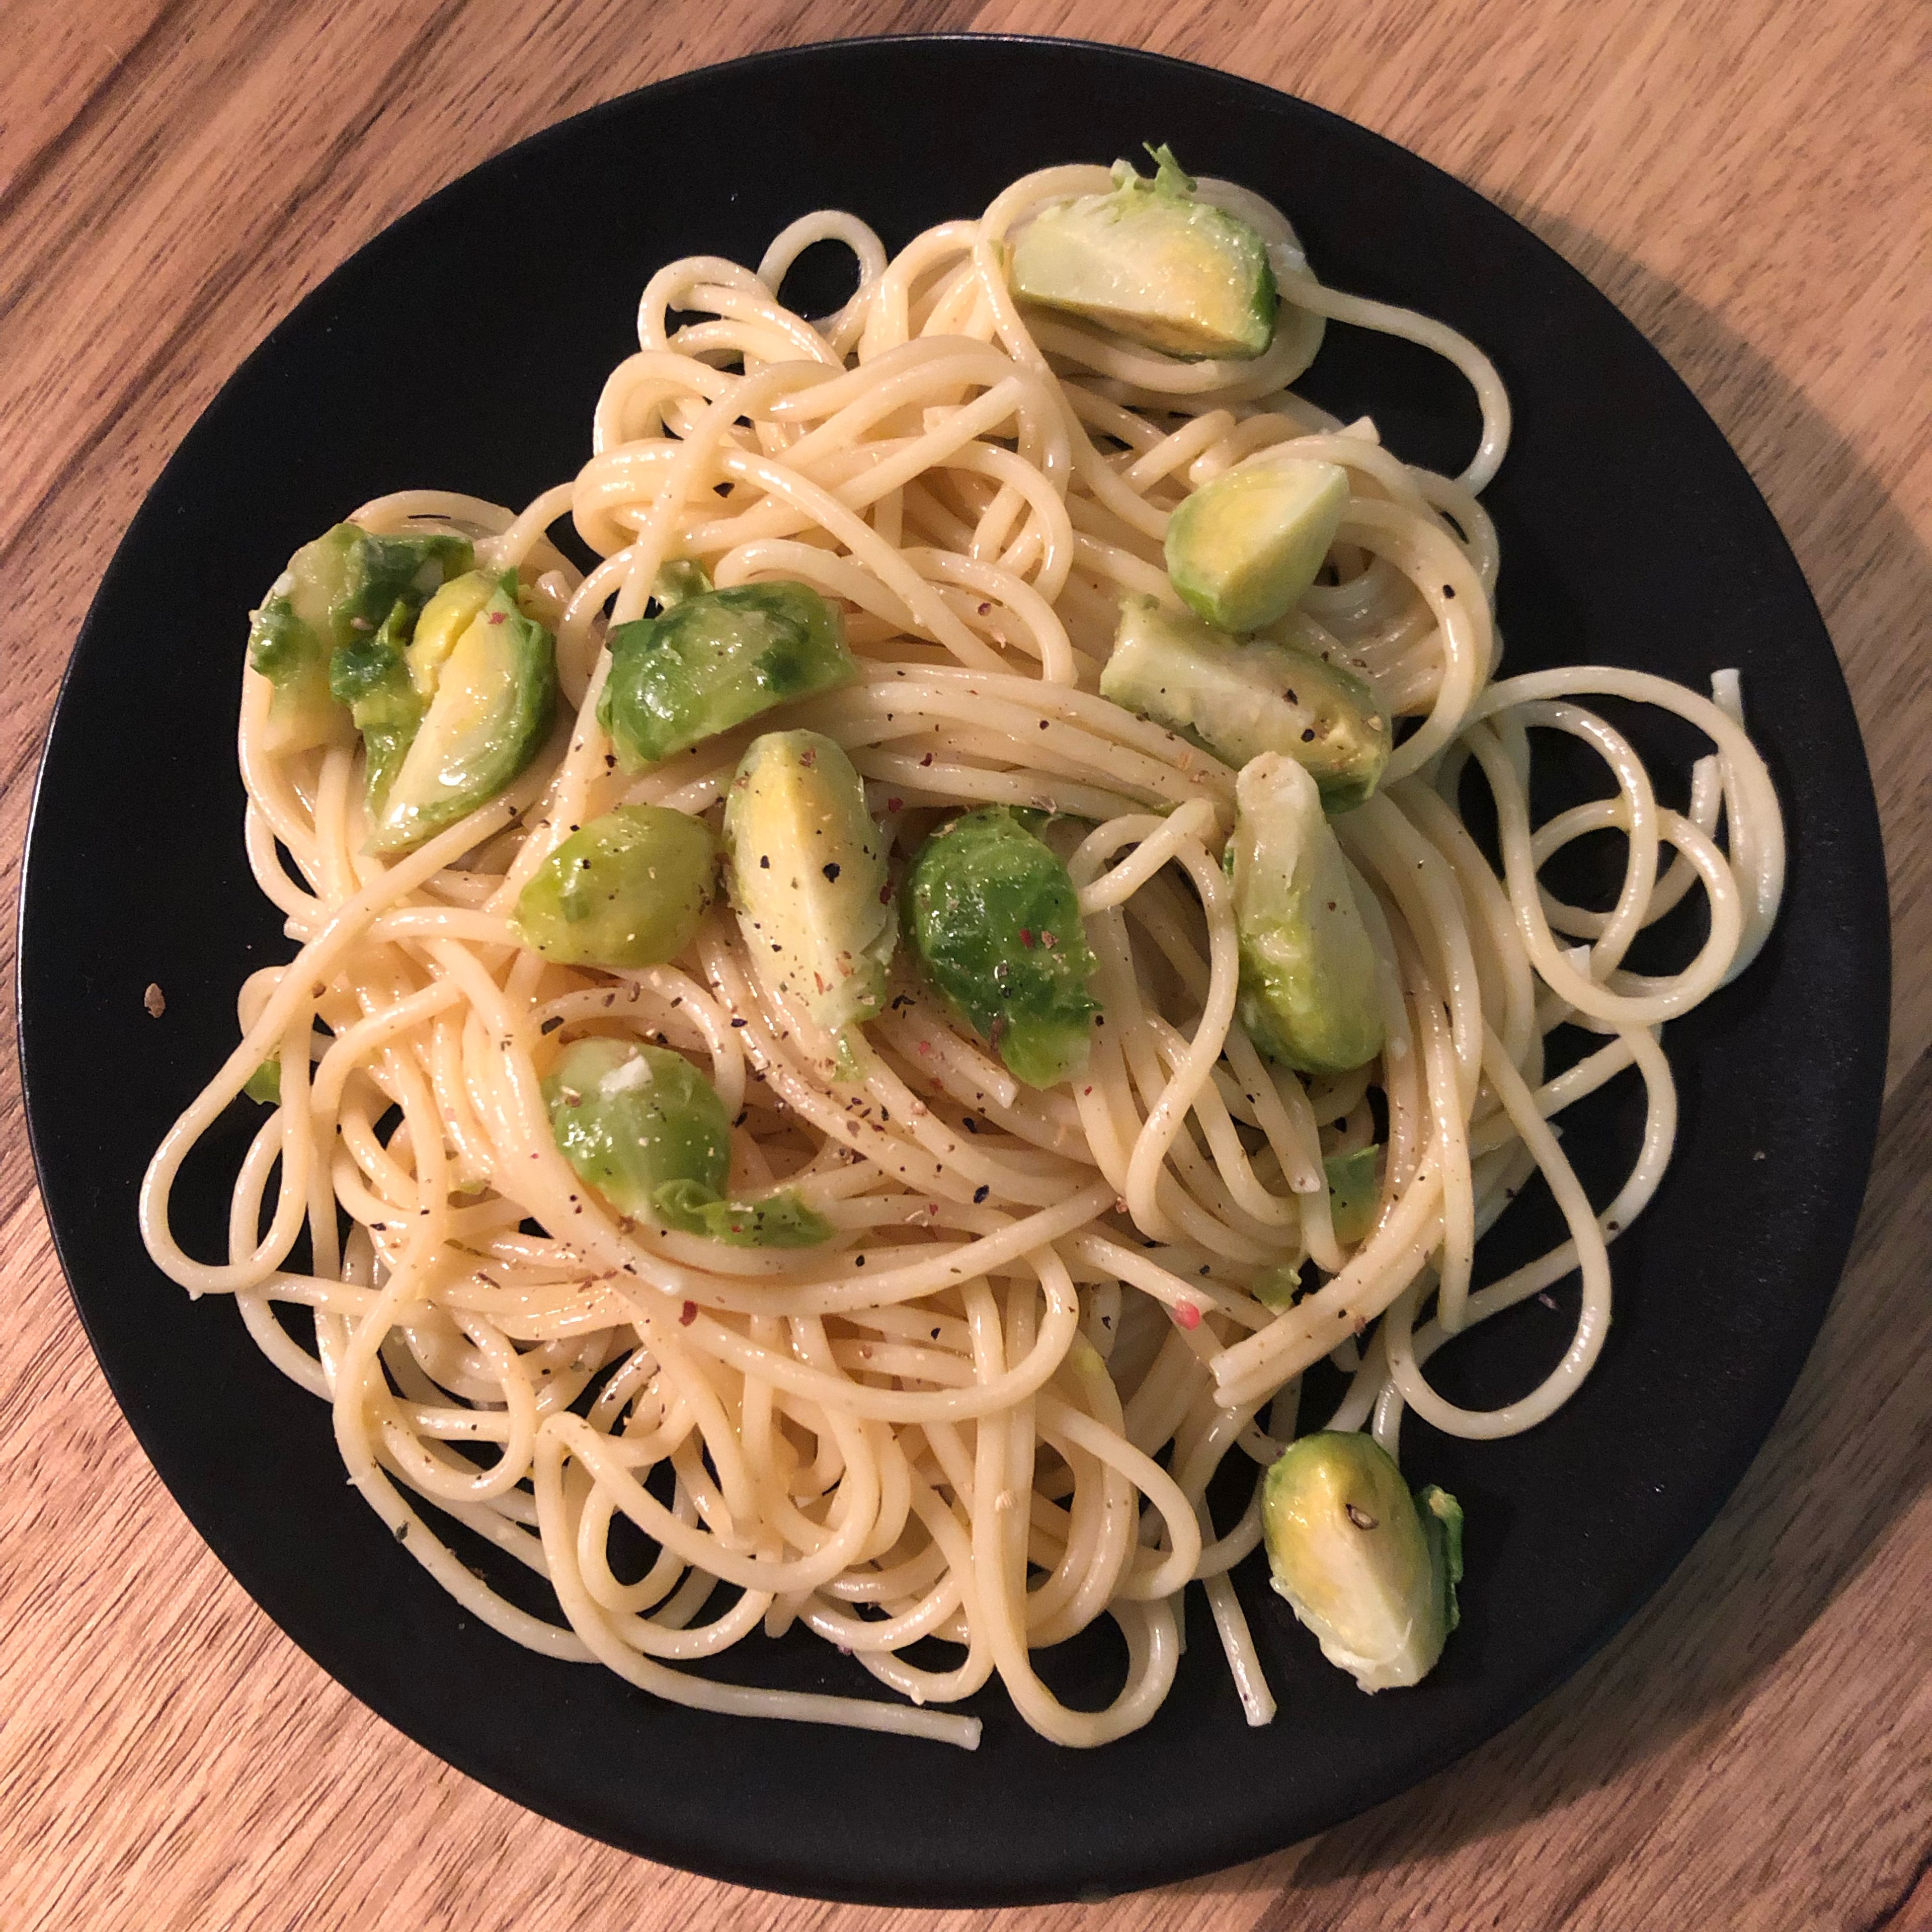 Pasta with Brussels sprouts